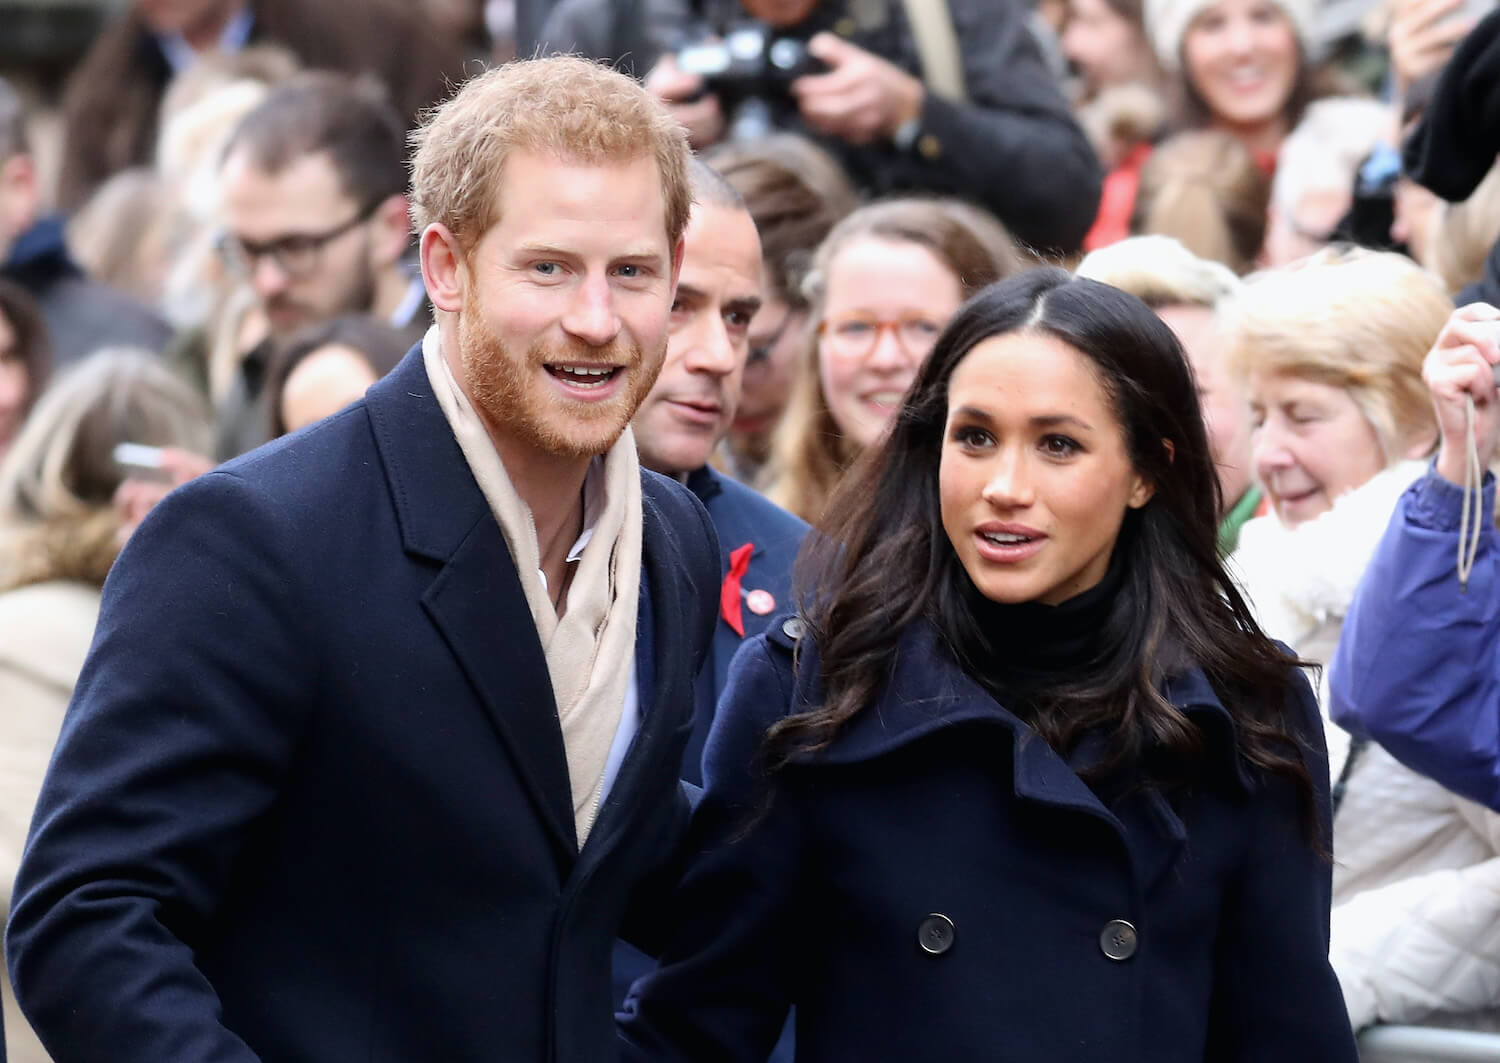 Prince Harry Subtly Indicated ‘All Was Not Well’ With Royal Family During Engagement Interview, Body Language Expert Says